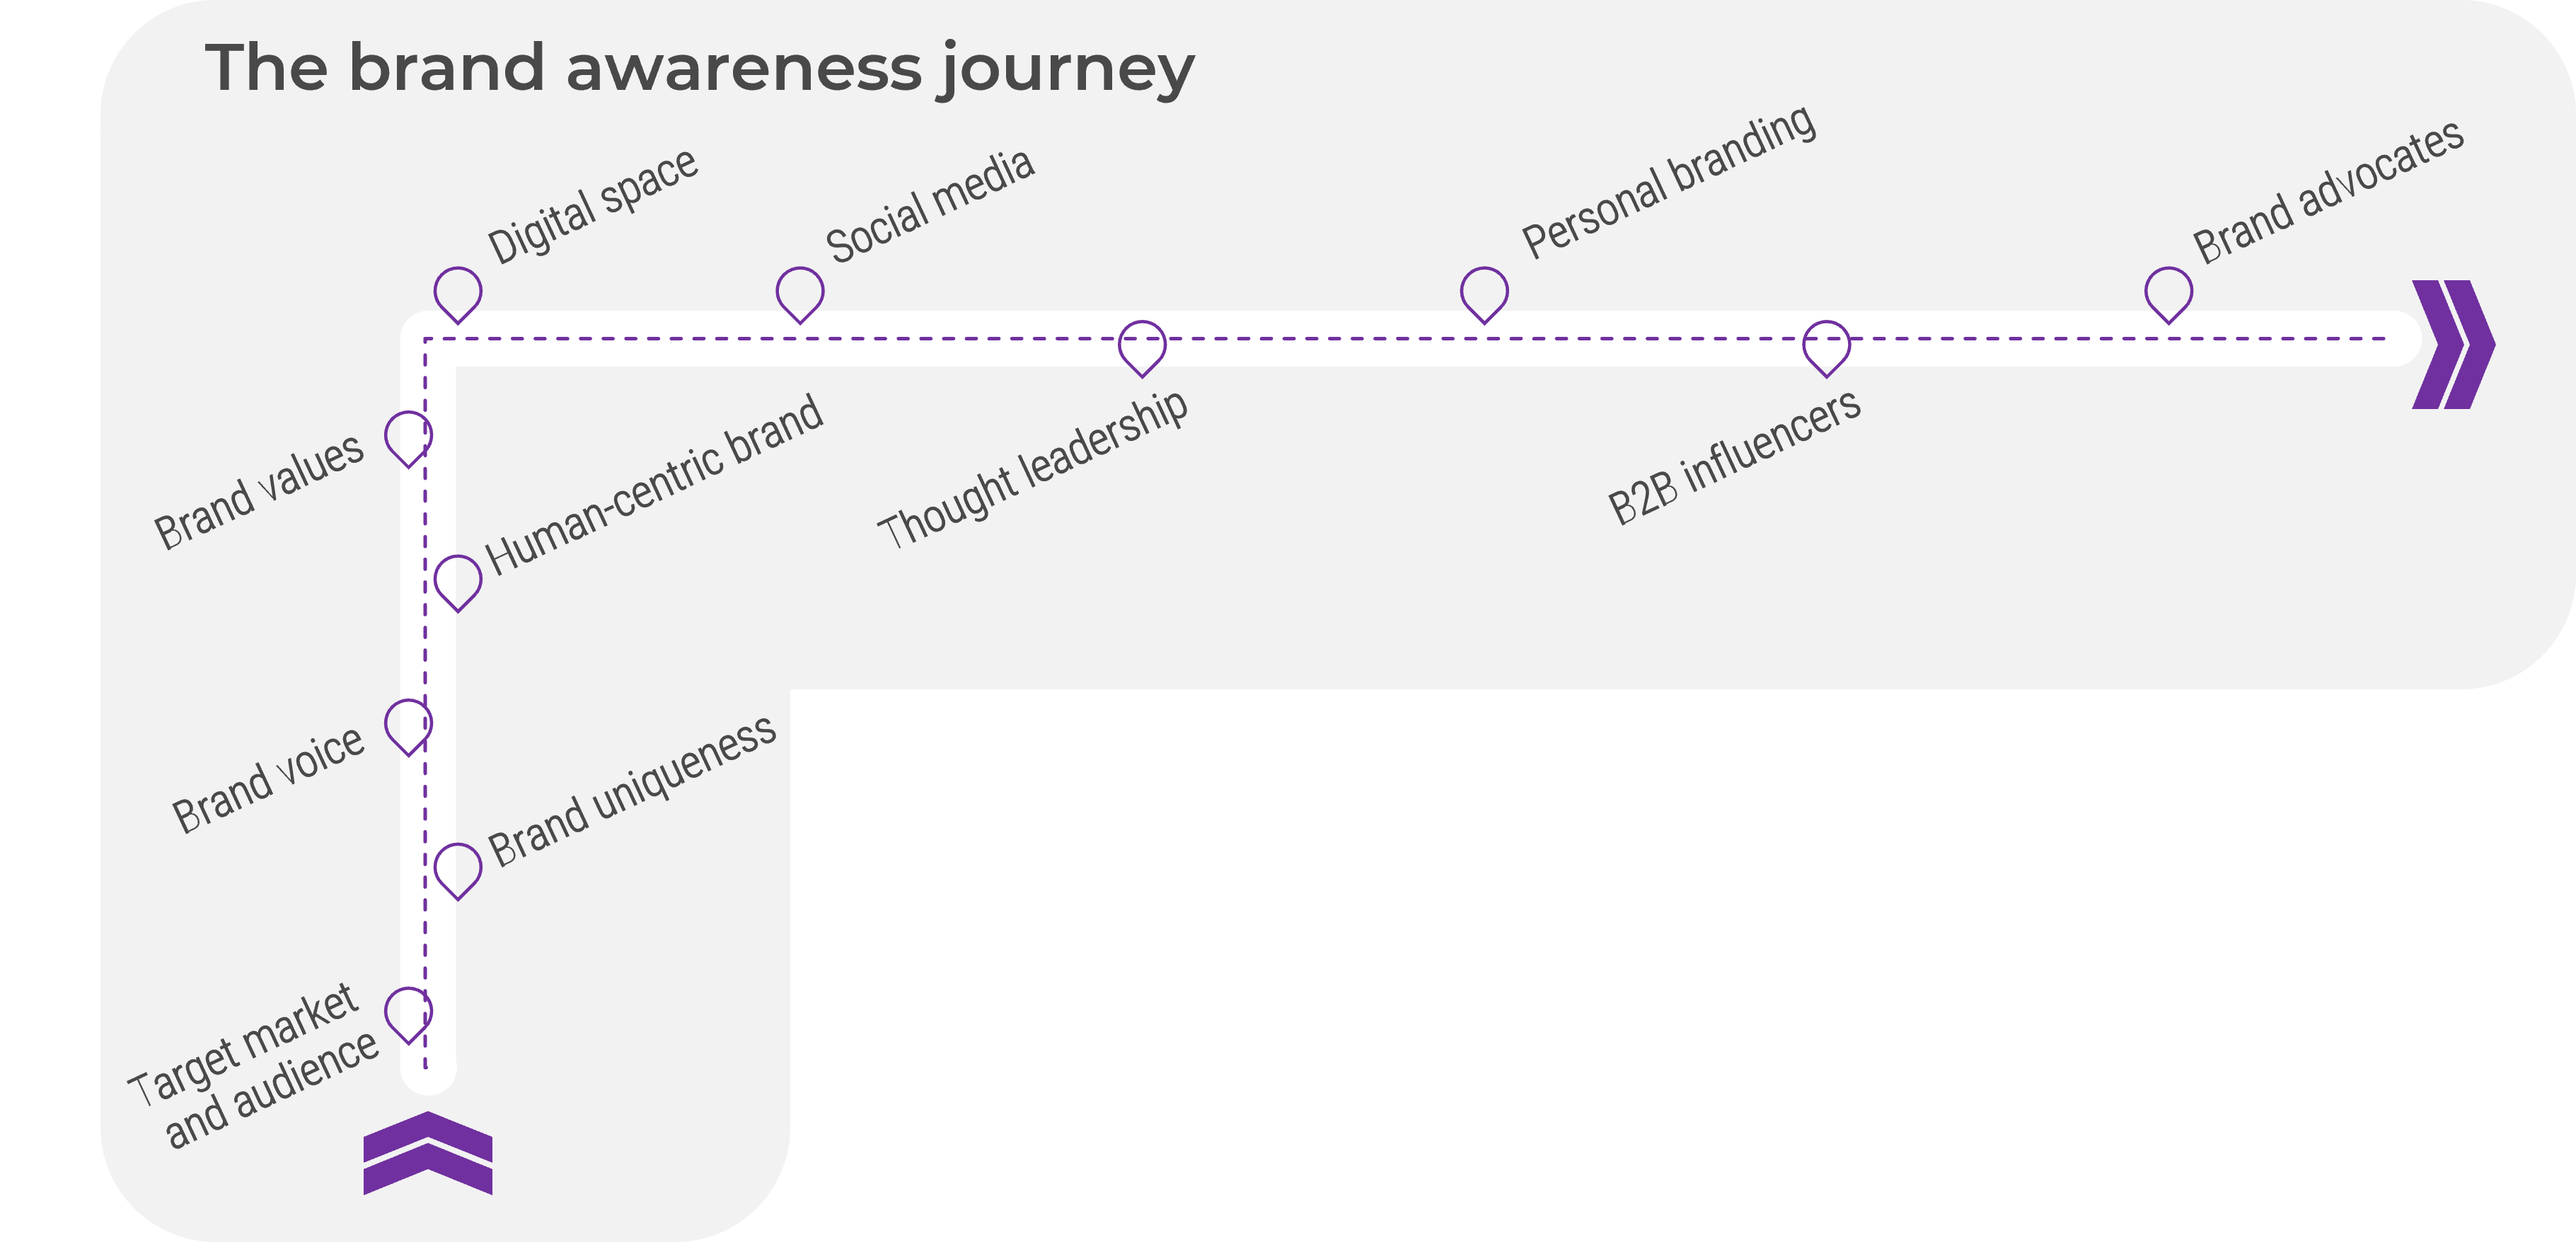 This is an image of the Brand Awareness Journey Roadmap.